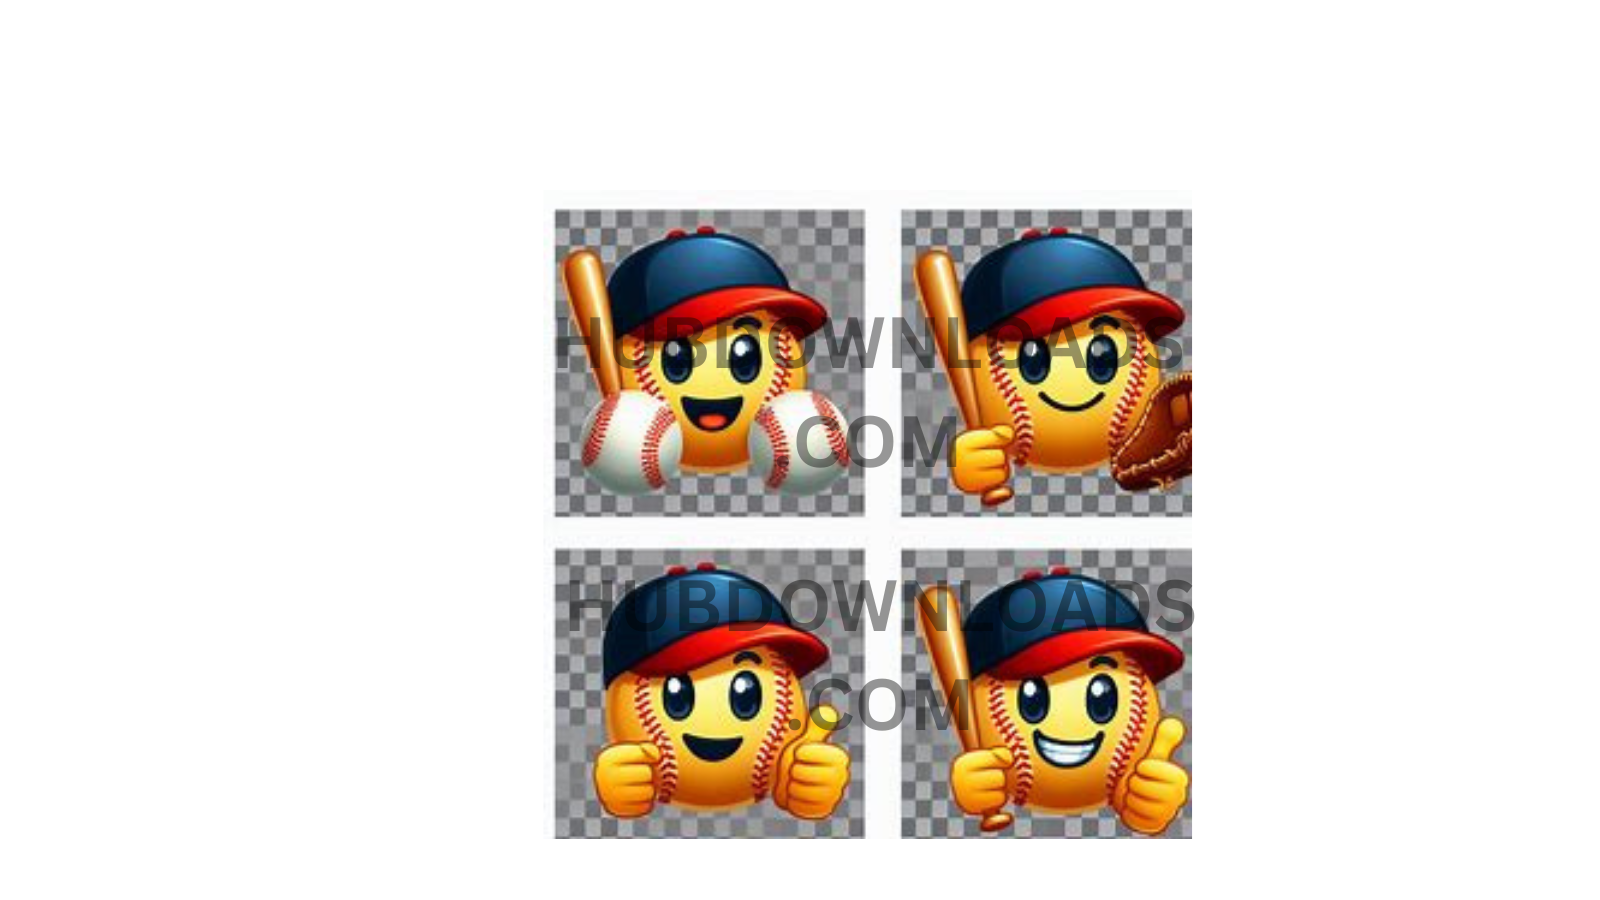 Baseball emoji with a bat and helmet, symbolizing excitement for a game.